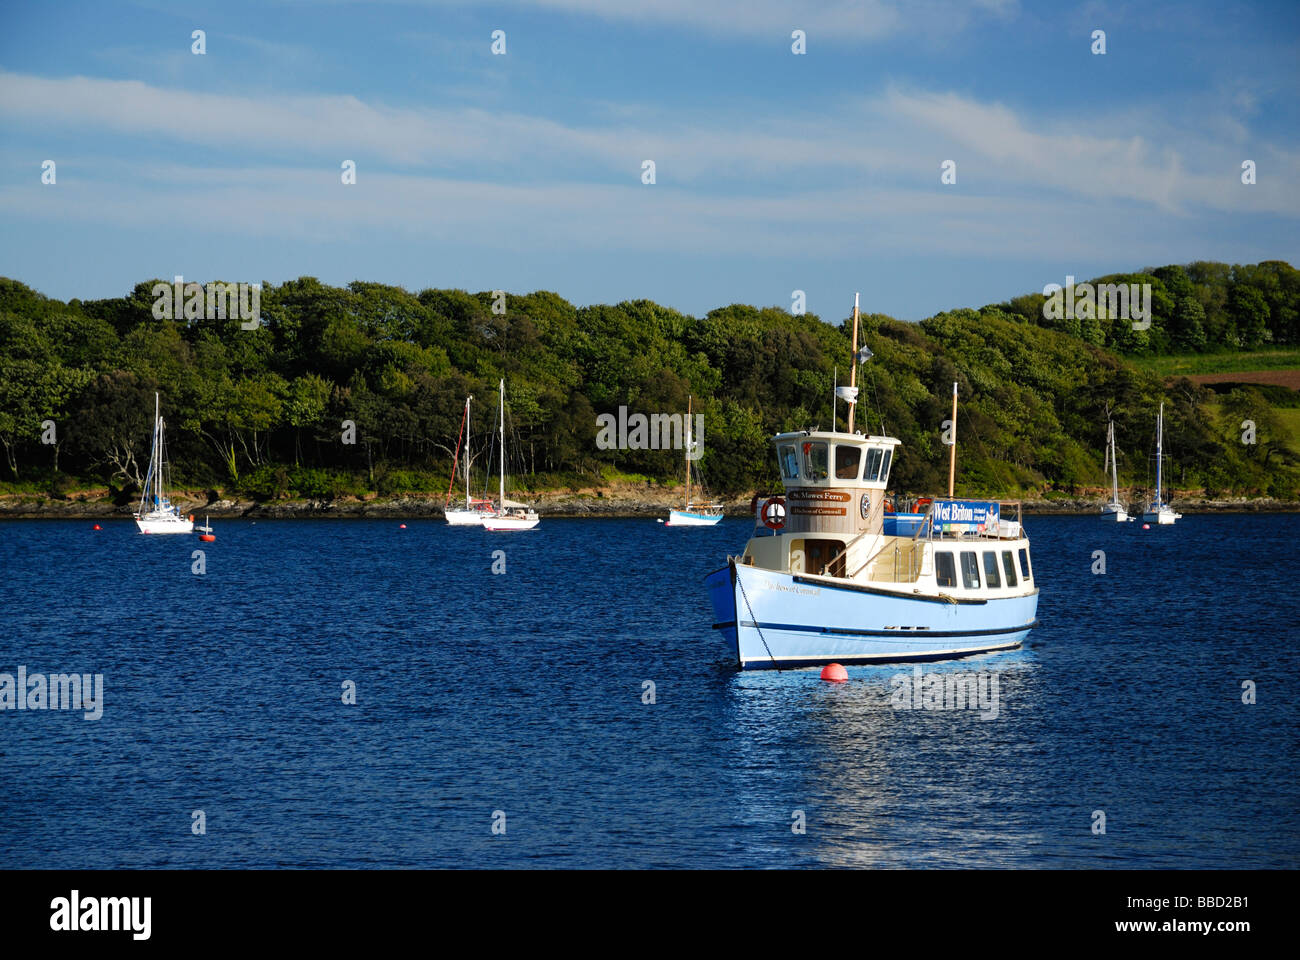 The St. Mawes - Falmouth ferry at St Mawes Harbour on the River Fal, Cornwall, UK Stock Photo